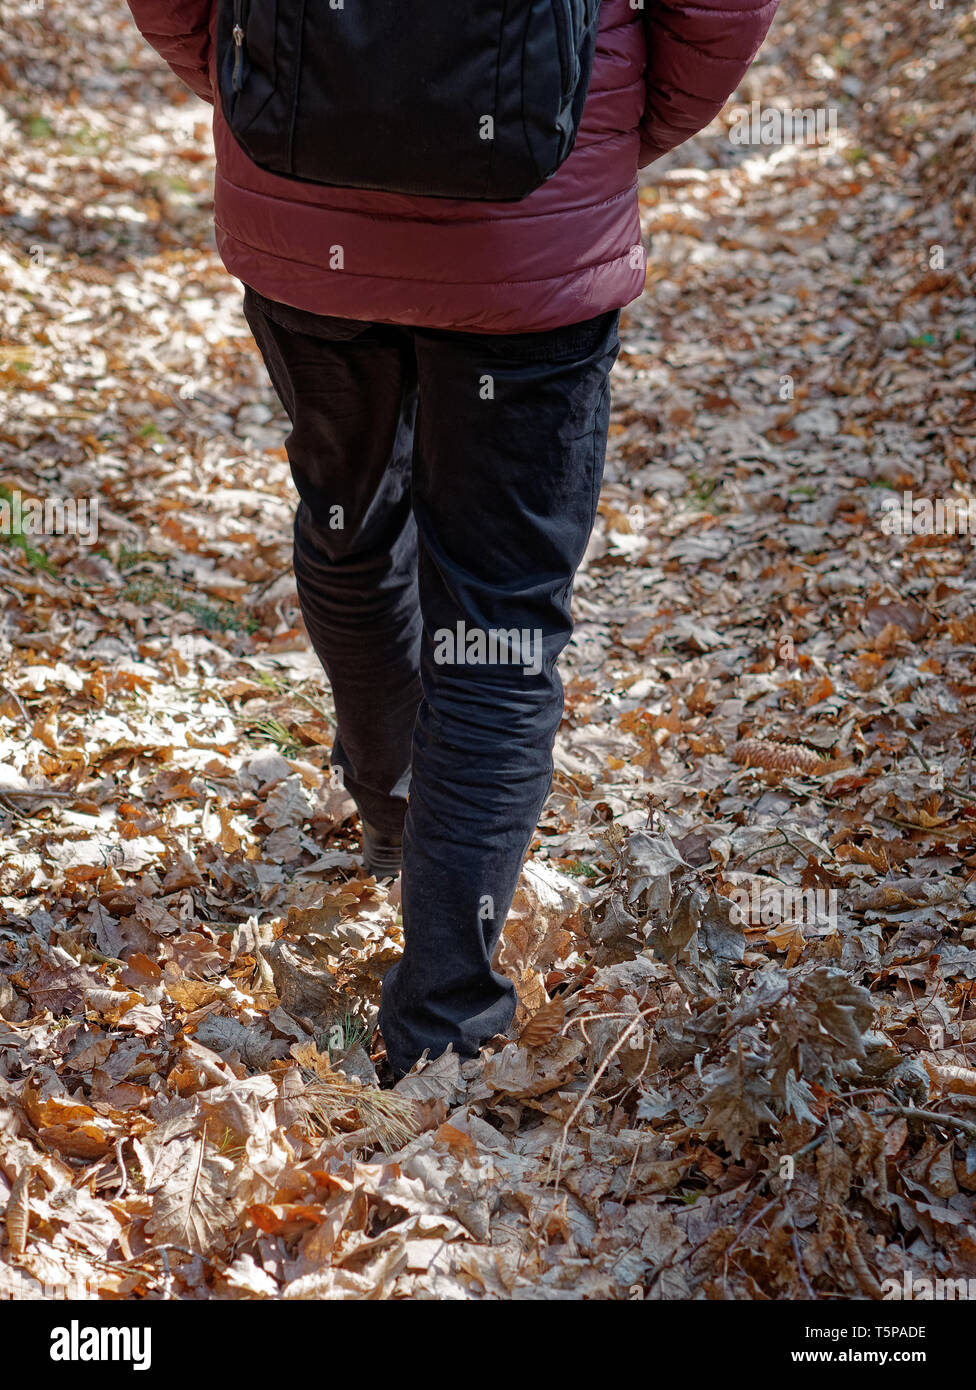 Man in his seventies walking in autumnal forest, wearing black trousers and carrying a backpack, viewed from behind. Stock Photo